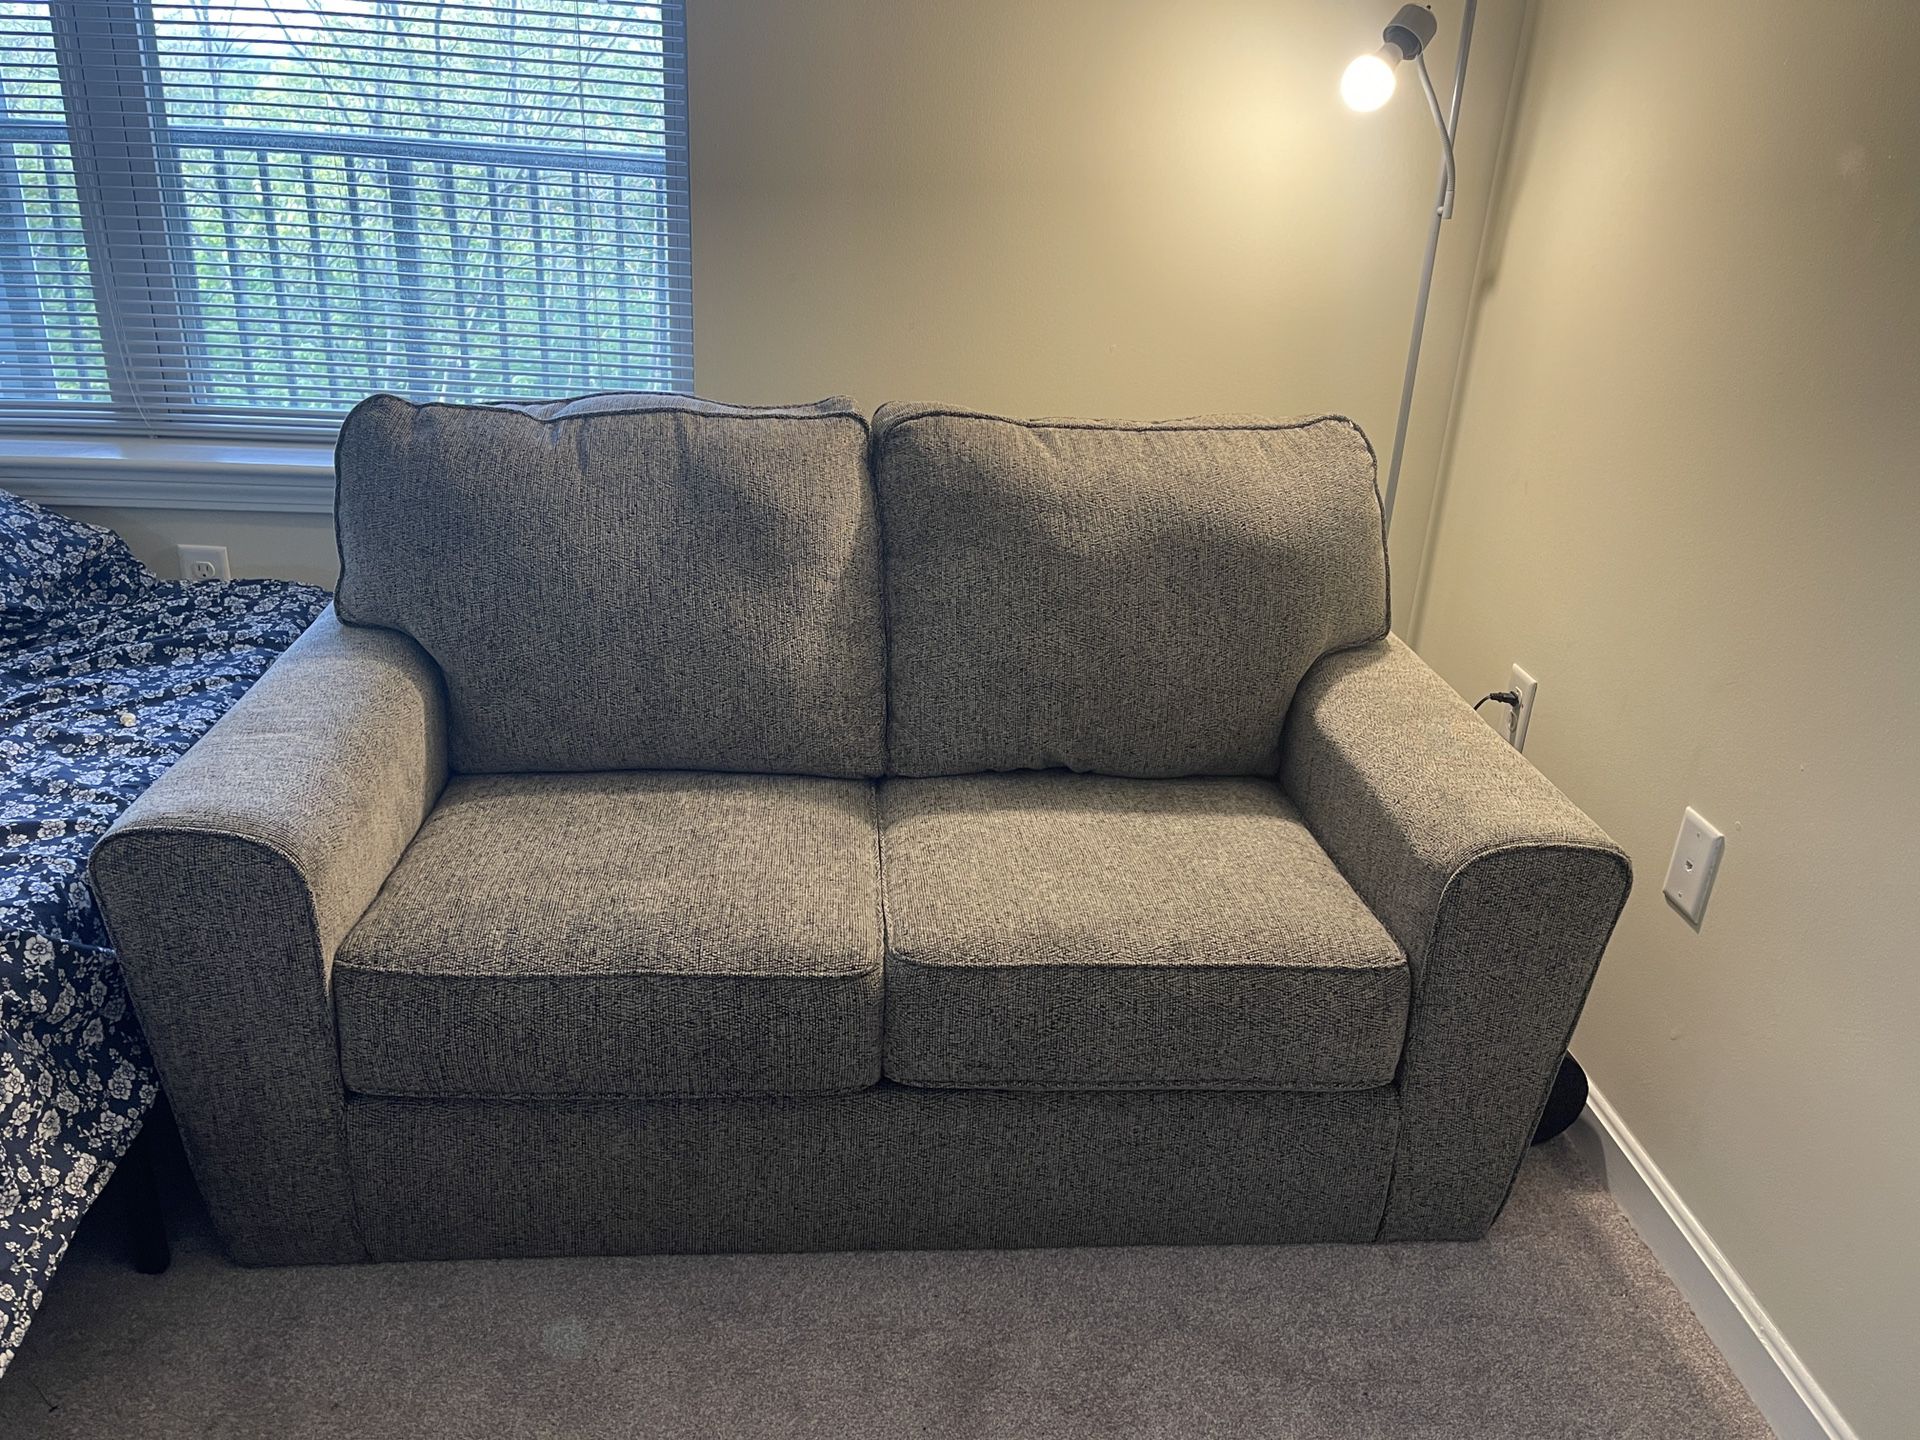 Loveseat From Ashley furniture!!